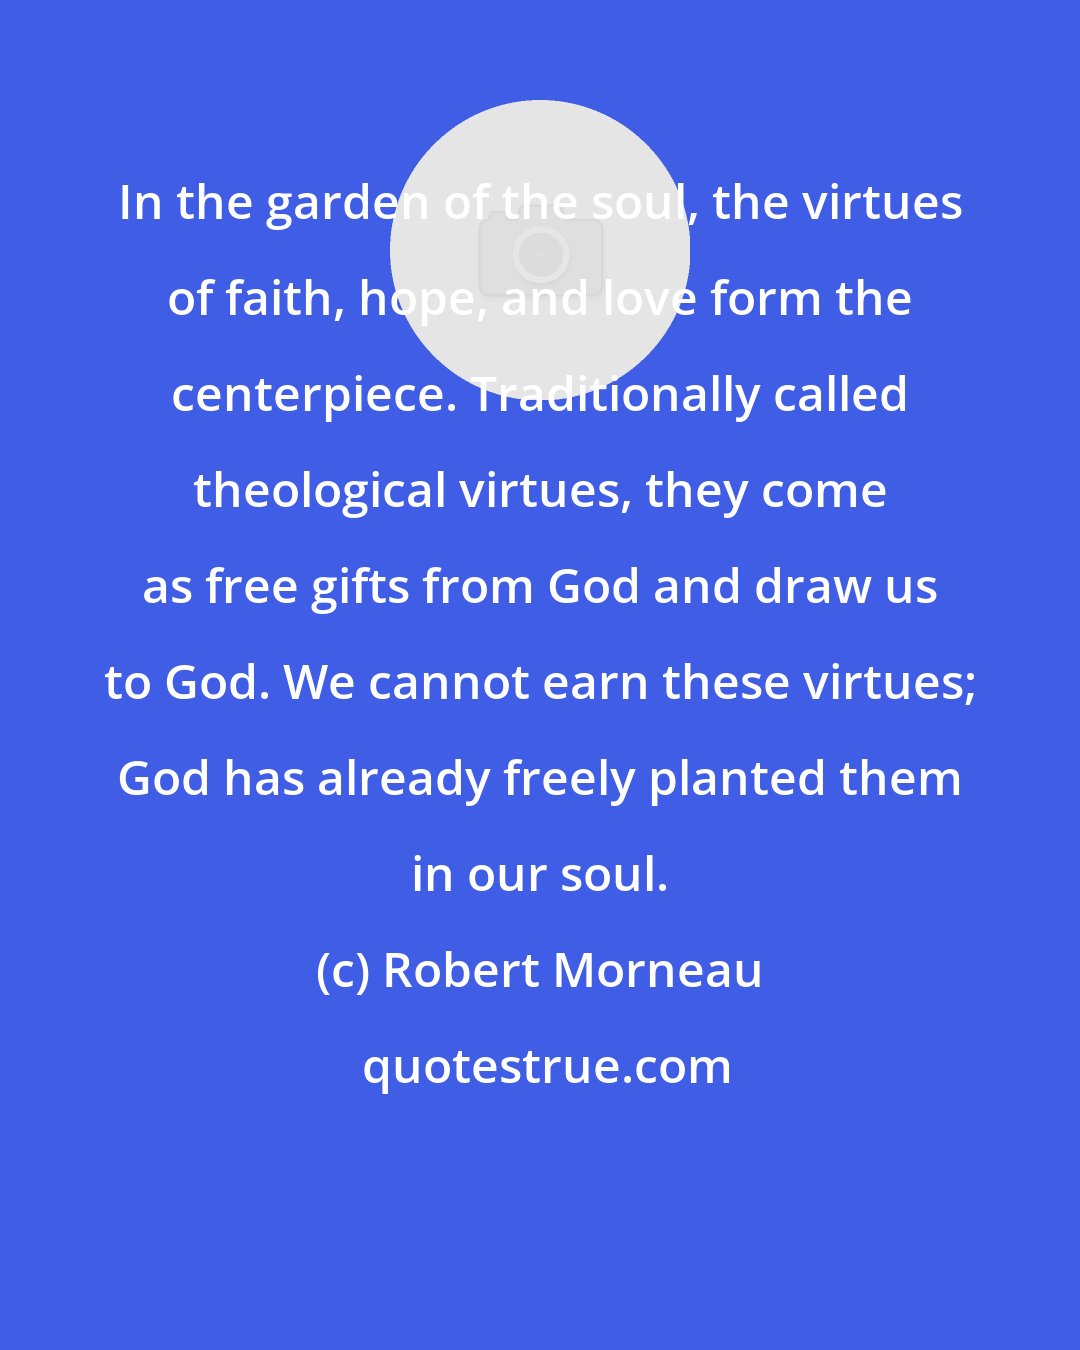 Robert Morneau: In the garden of the soul, the virtues of faith, hope, and love form the centerpiece. Traditionally called theological virtues, they come as free gifts from God and draw us to God. We cannot earn these virtues; God has already freely planted them in our soul.